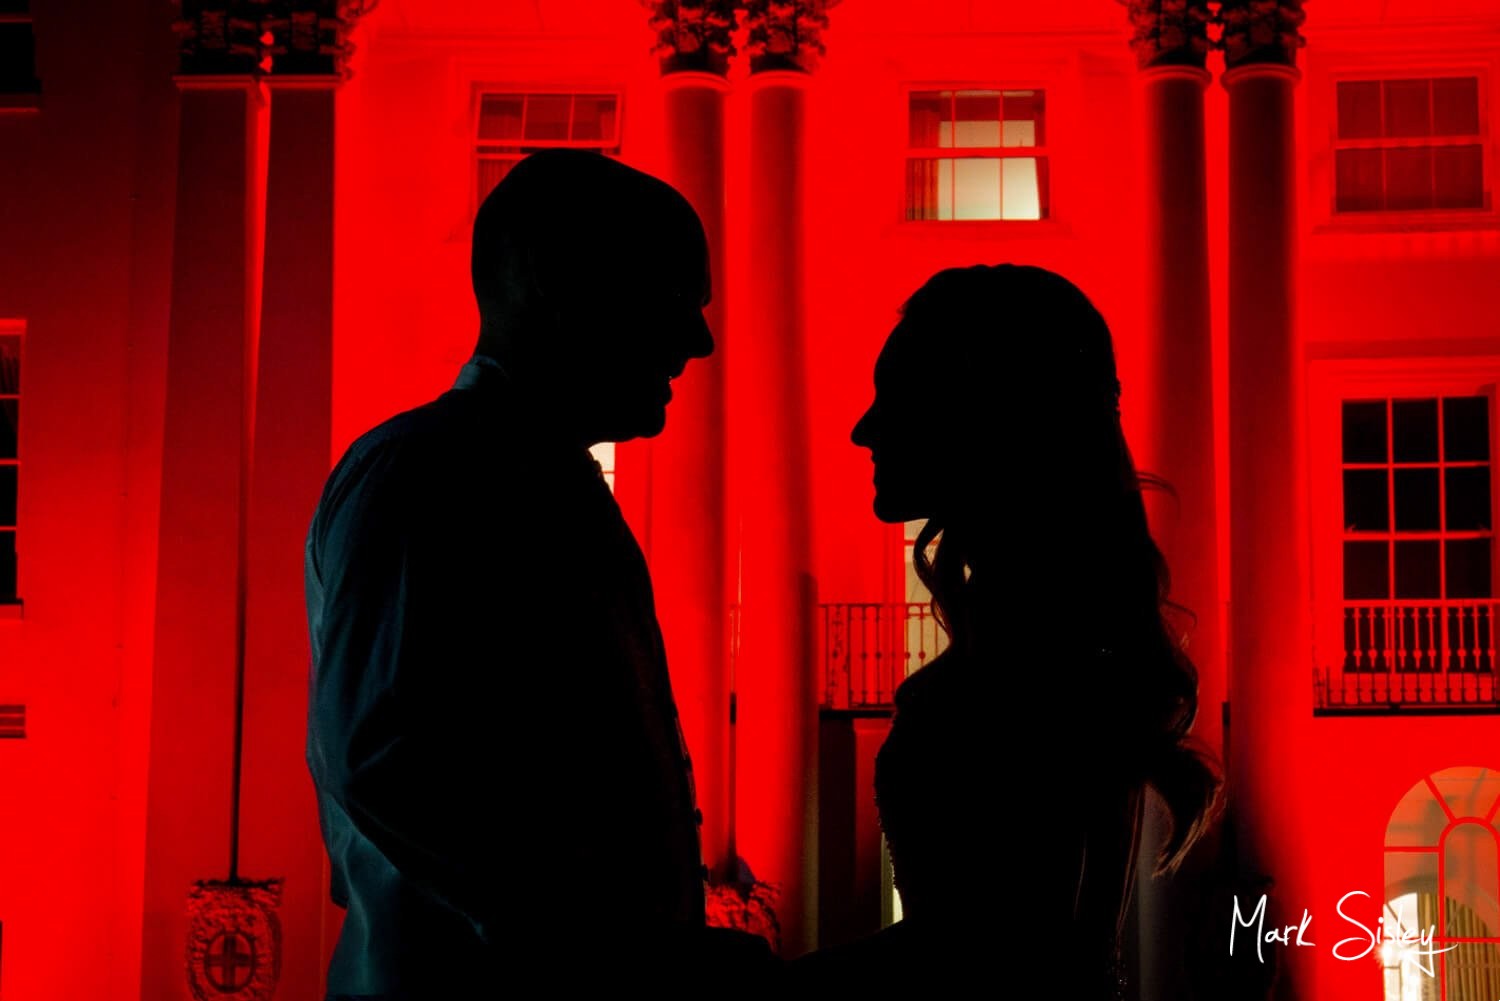 Beaumont Estate wedding photographs of the newlyweds with the floodlit building